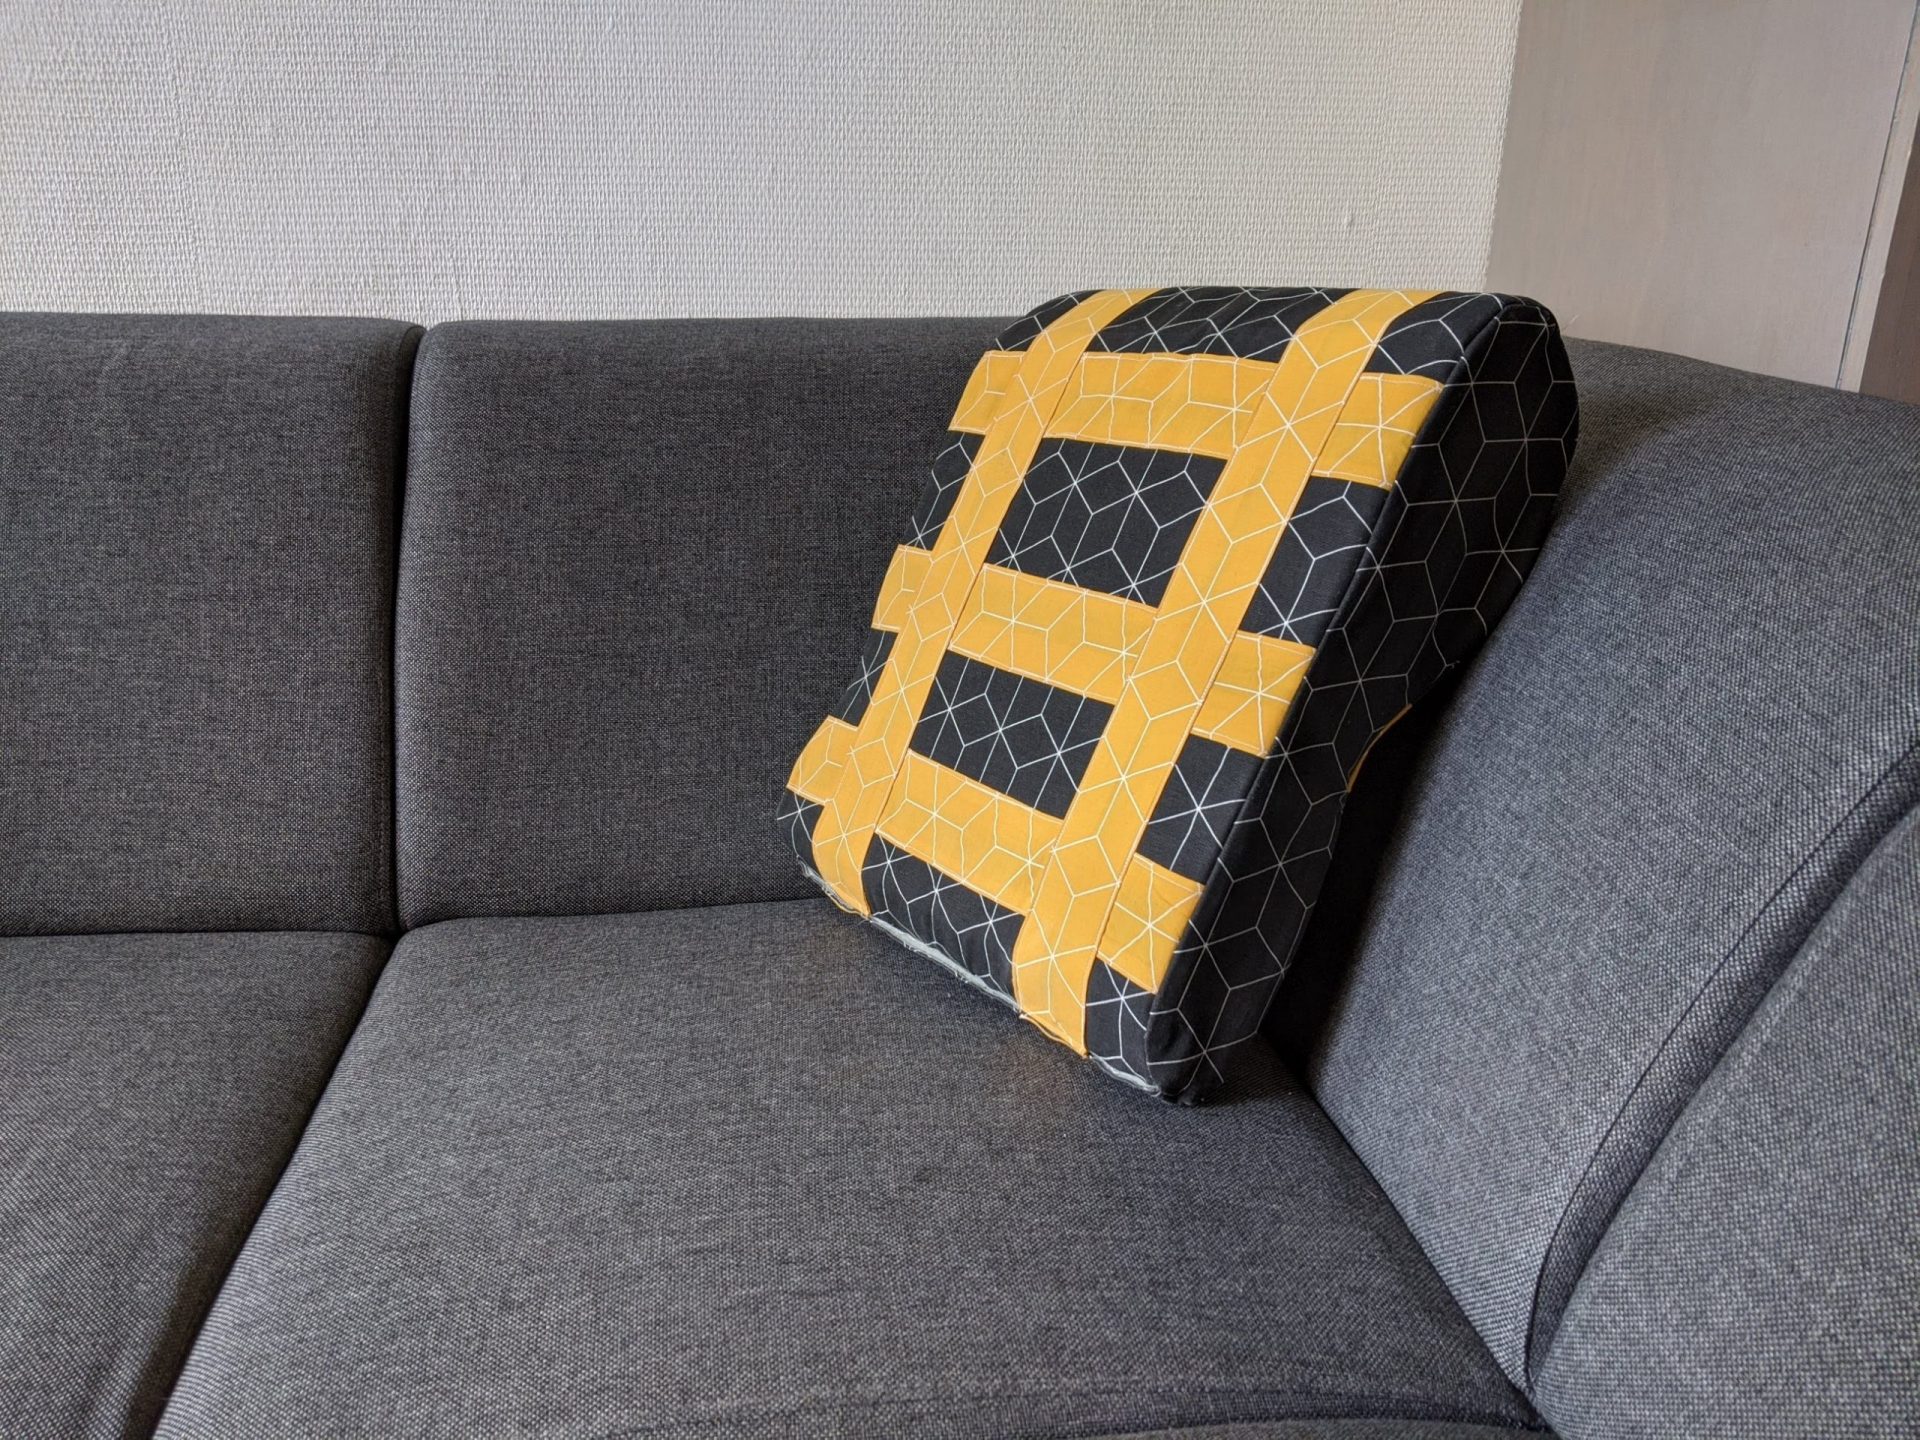 shows the prototype of the pillow on the couch